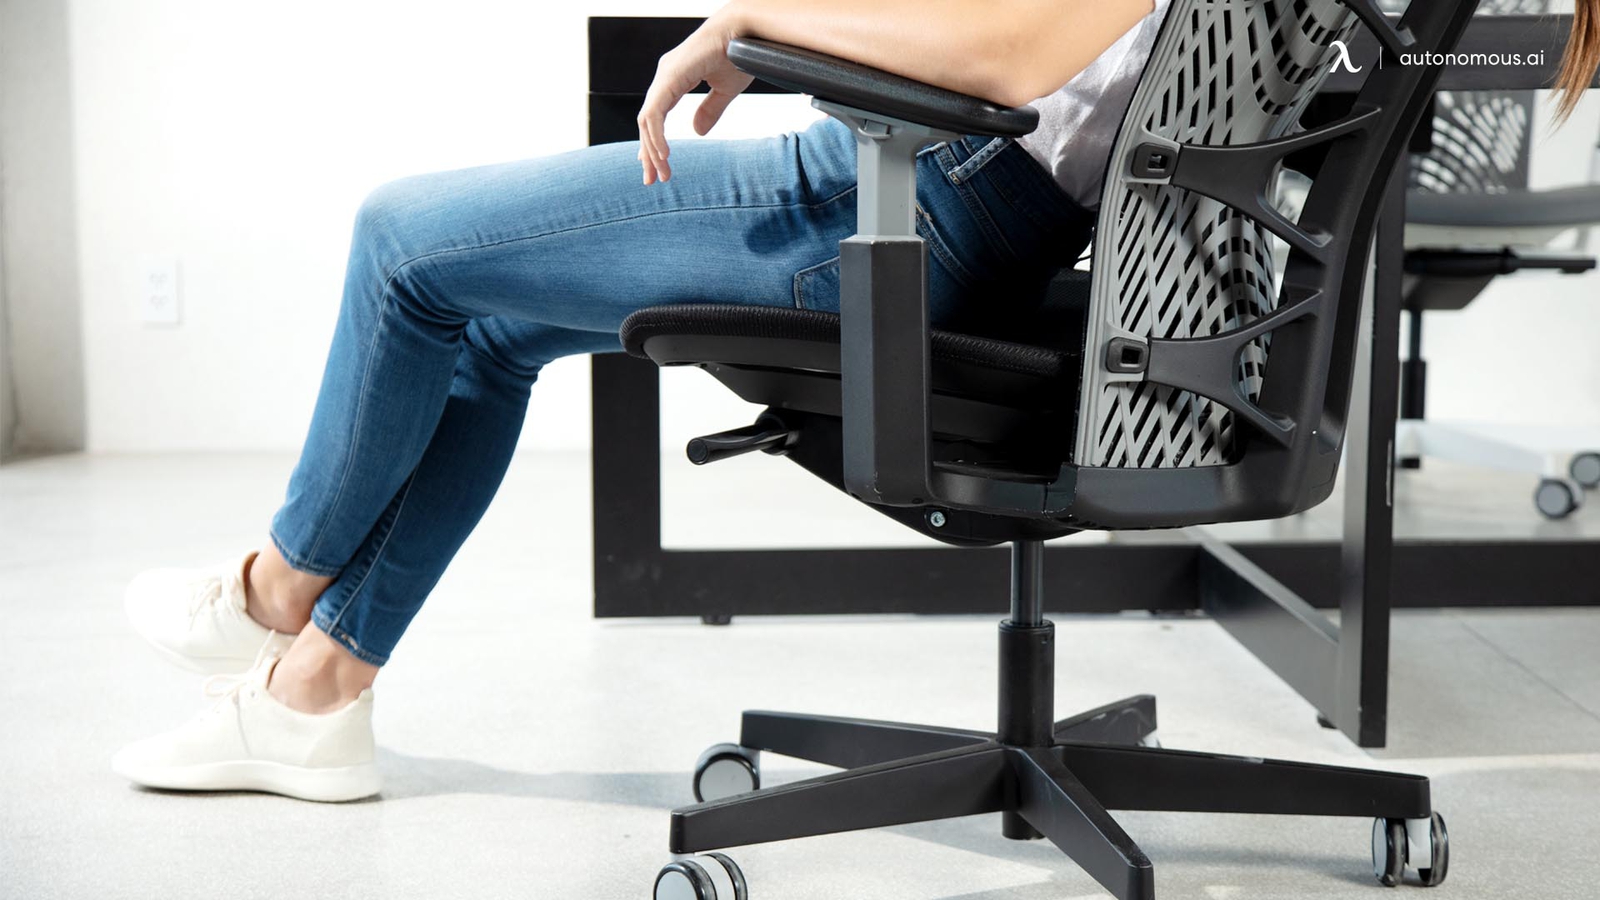 Where to Buy a New Office Chair This Black Friday?